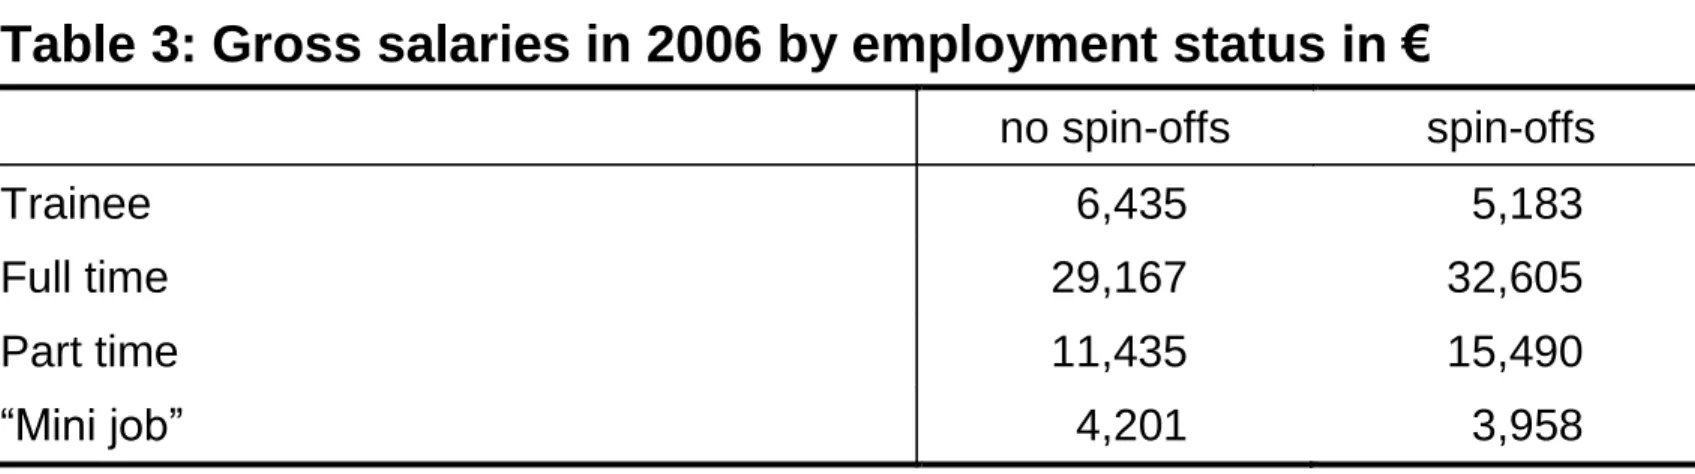 Table 3: Gross salaries in 2006 by employment status in €  no spin-offs  spin-offs  Trainee  6,435  5,183  Full time  29,167  32,605  Part time  11,435  15,490  “Mini job”  4,201  3,958 